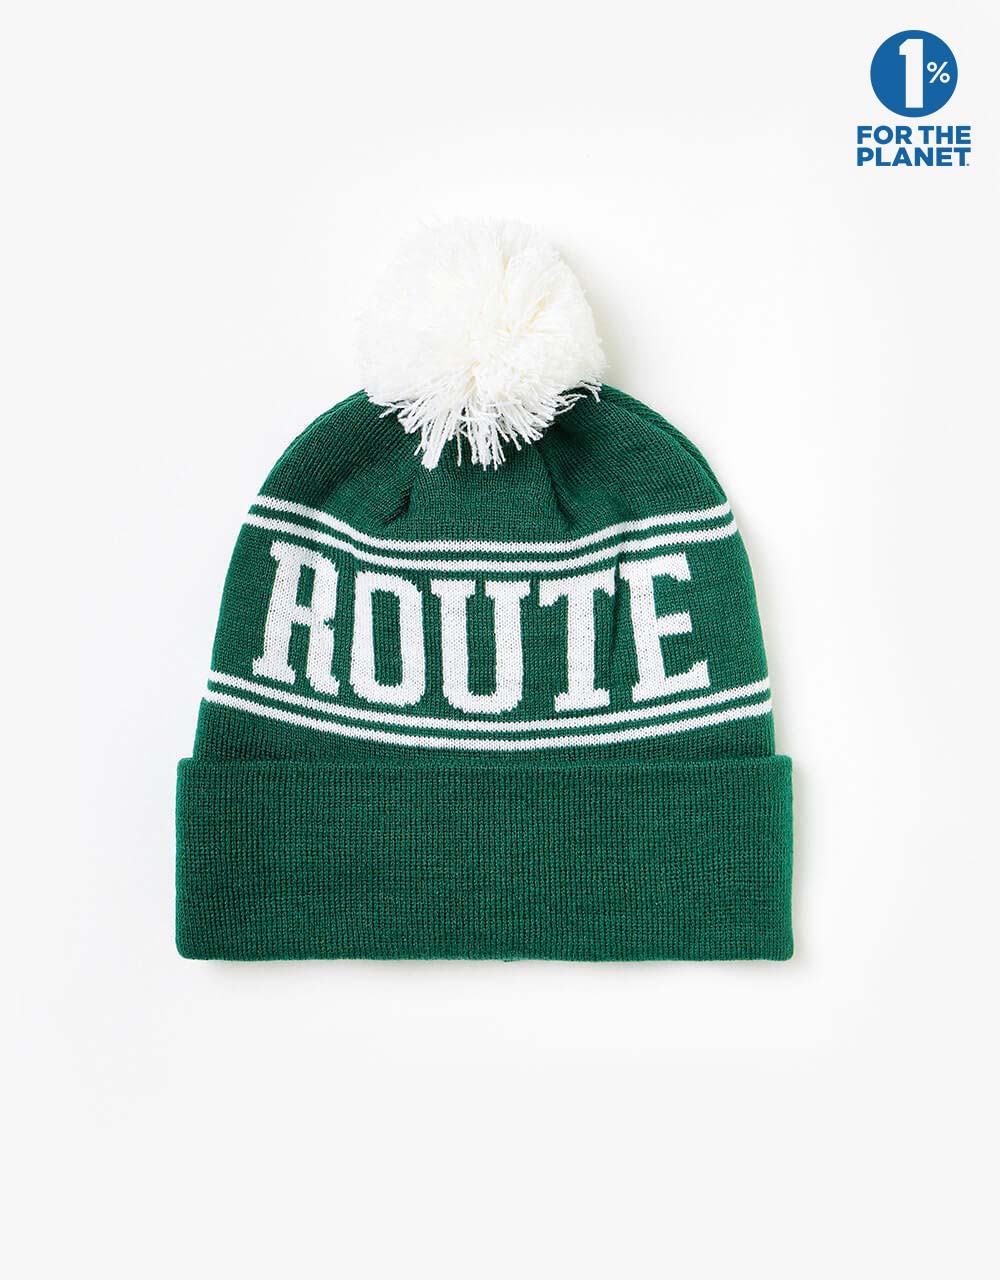 Route One Team Bobble Beanie - Forest Green/White